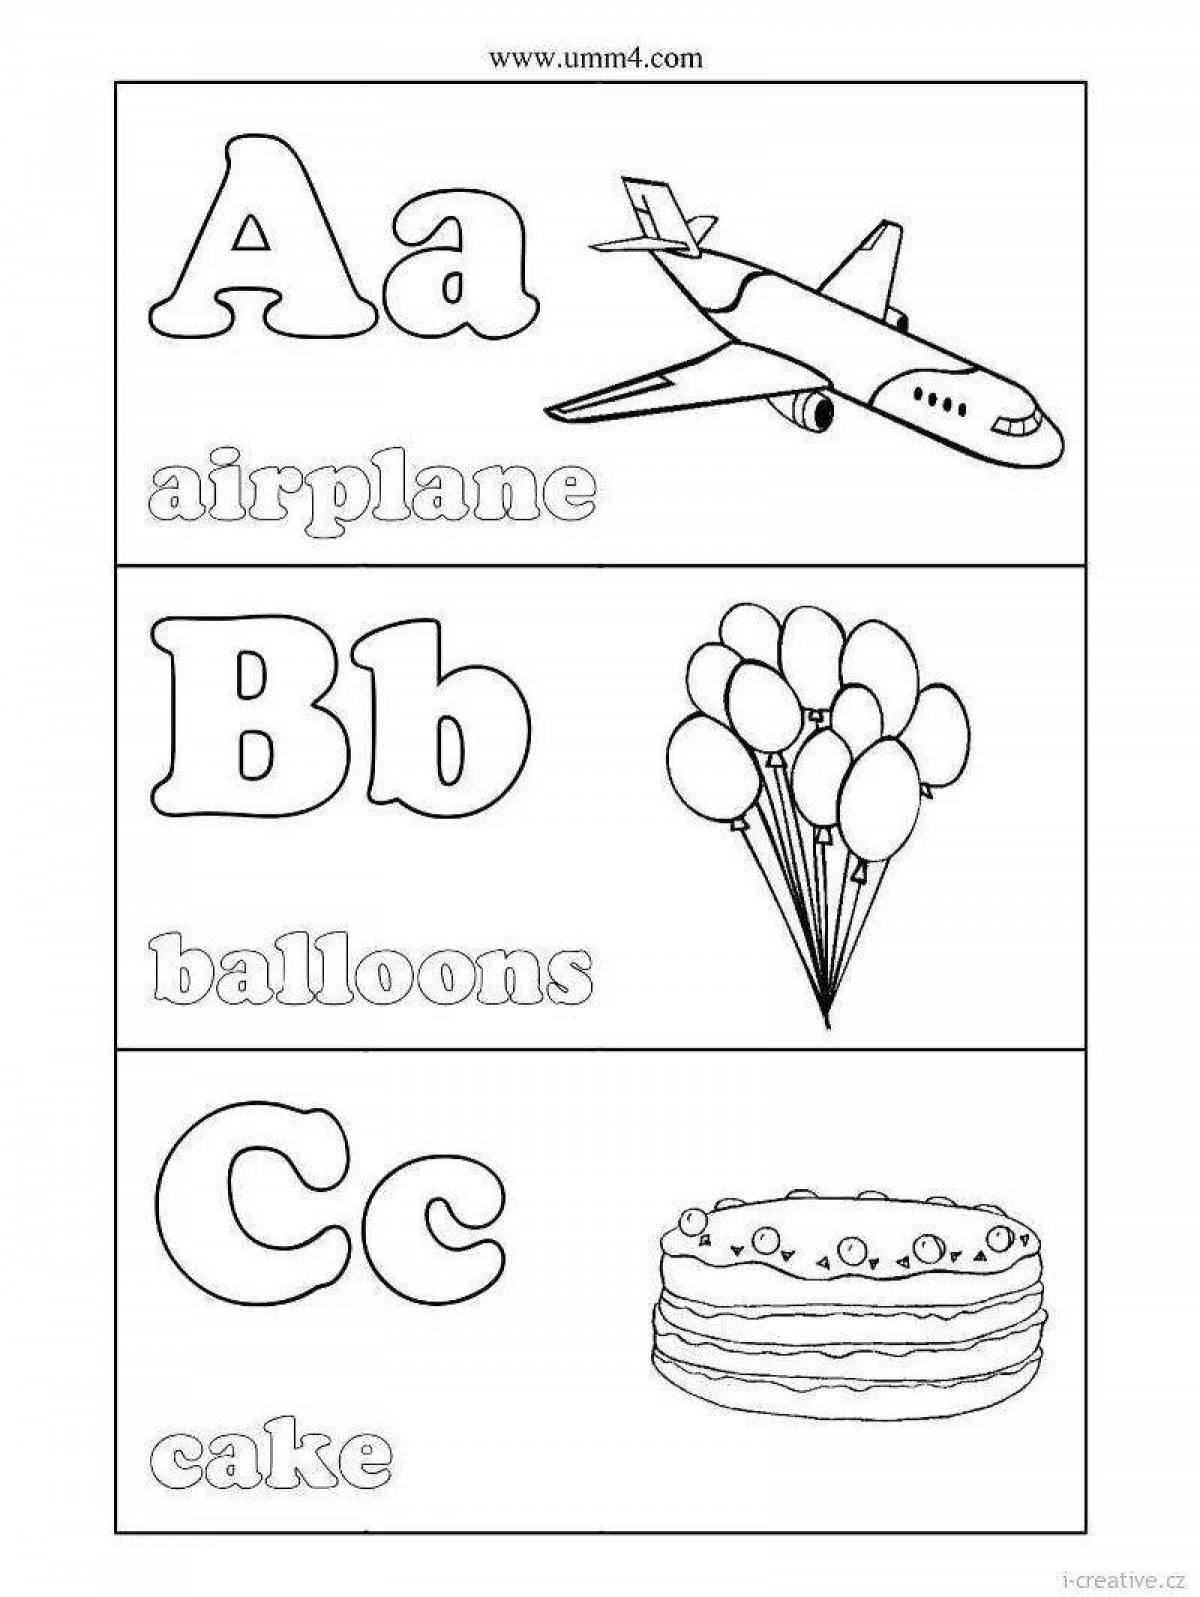 Coloring for children with bright English letters